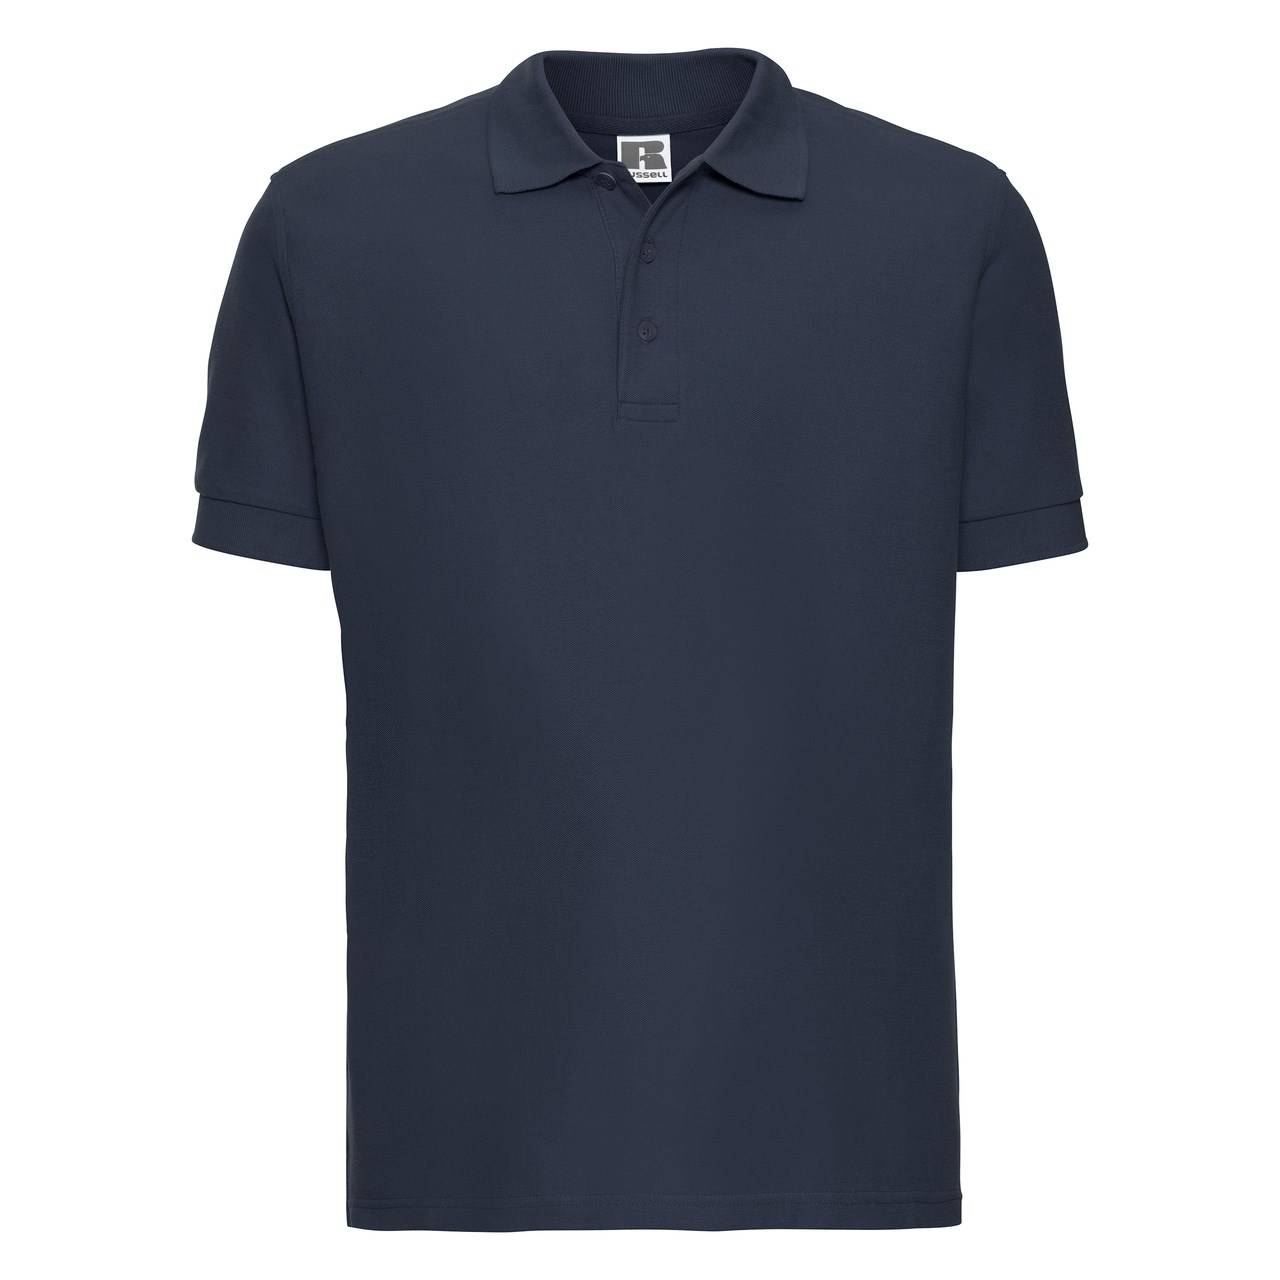 Men's navy blue cotton polo shirt Ultimate Russell